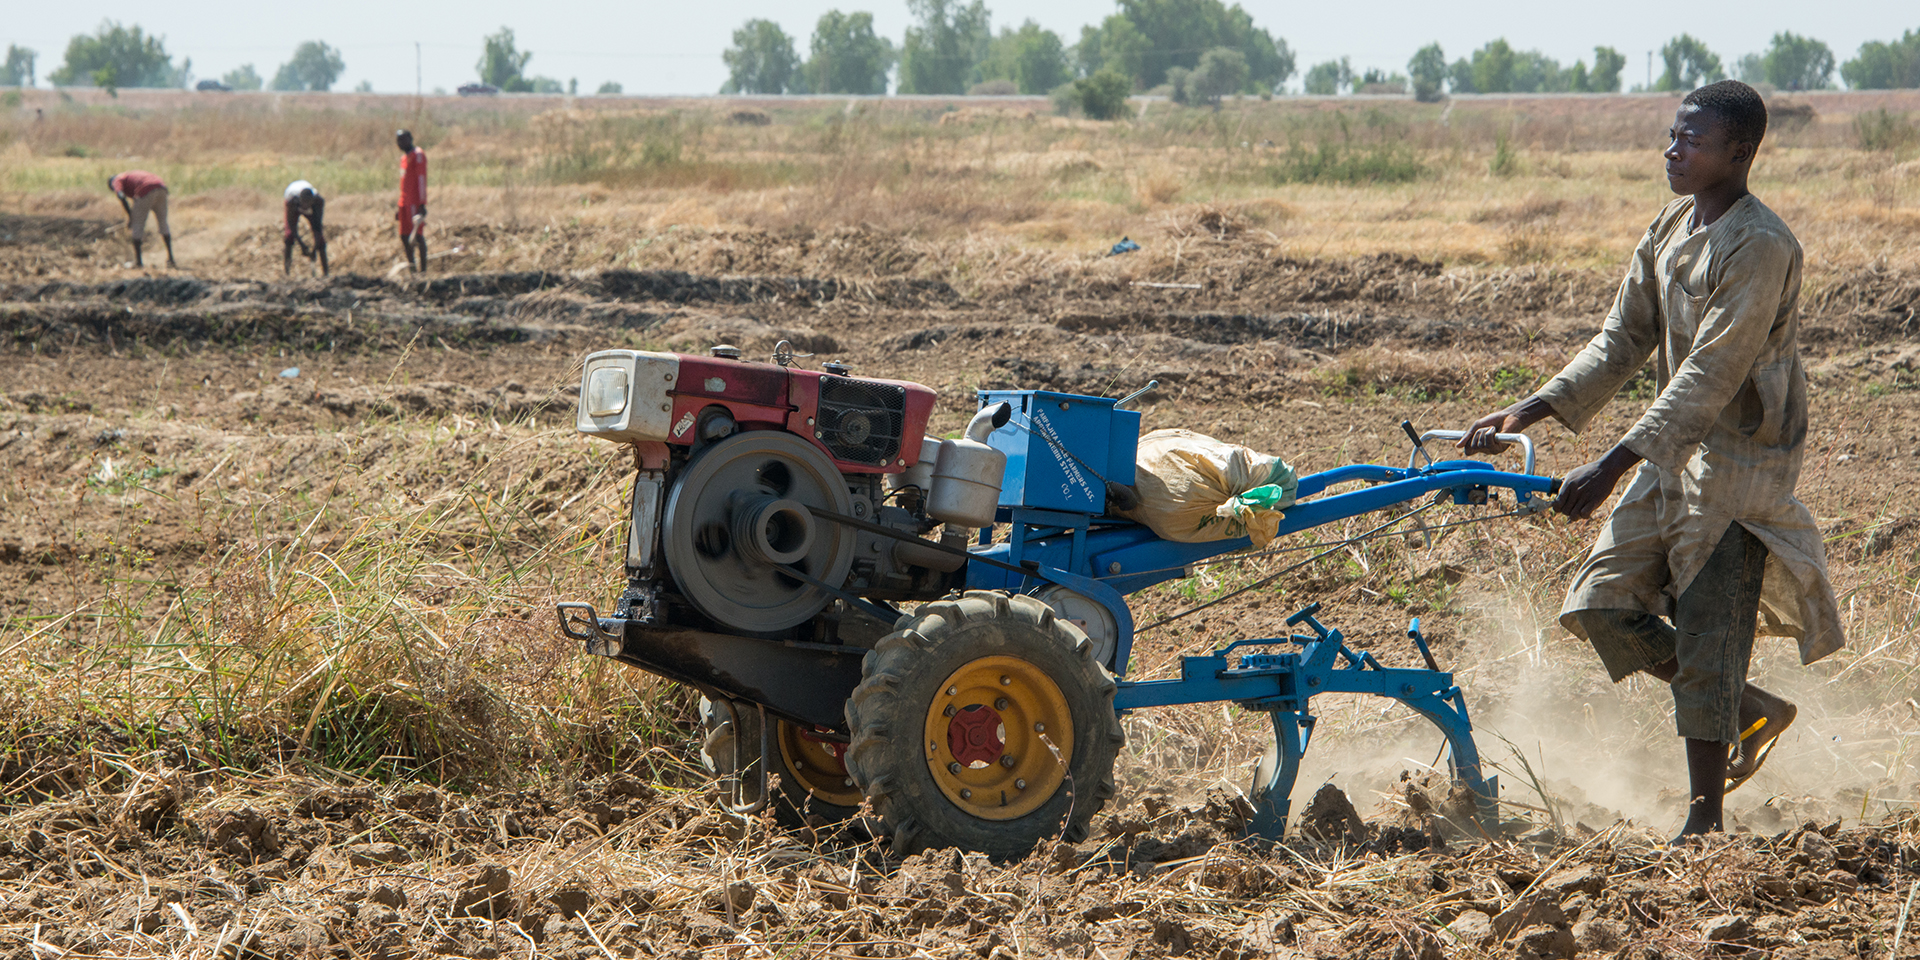 A man operates a blue and red power tiller on farmland as three farmers are working in the background.